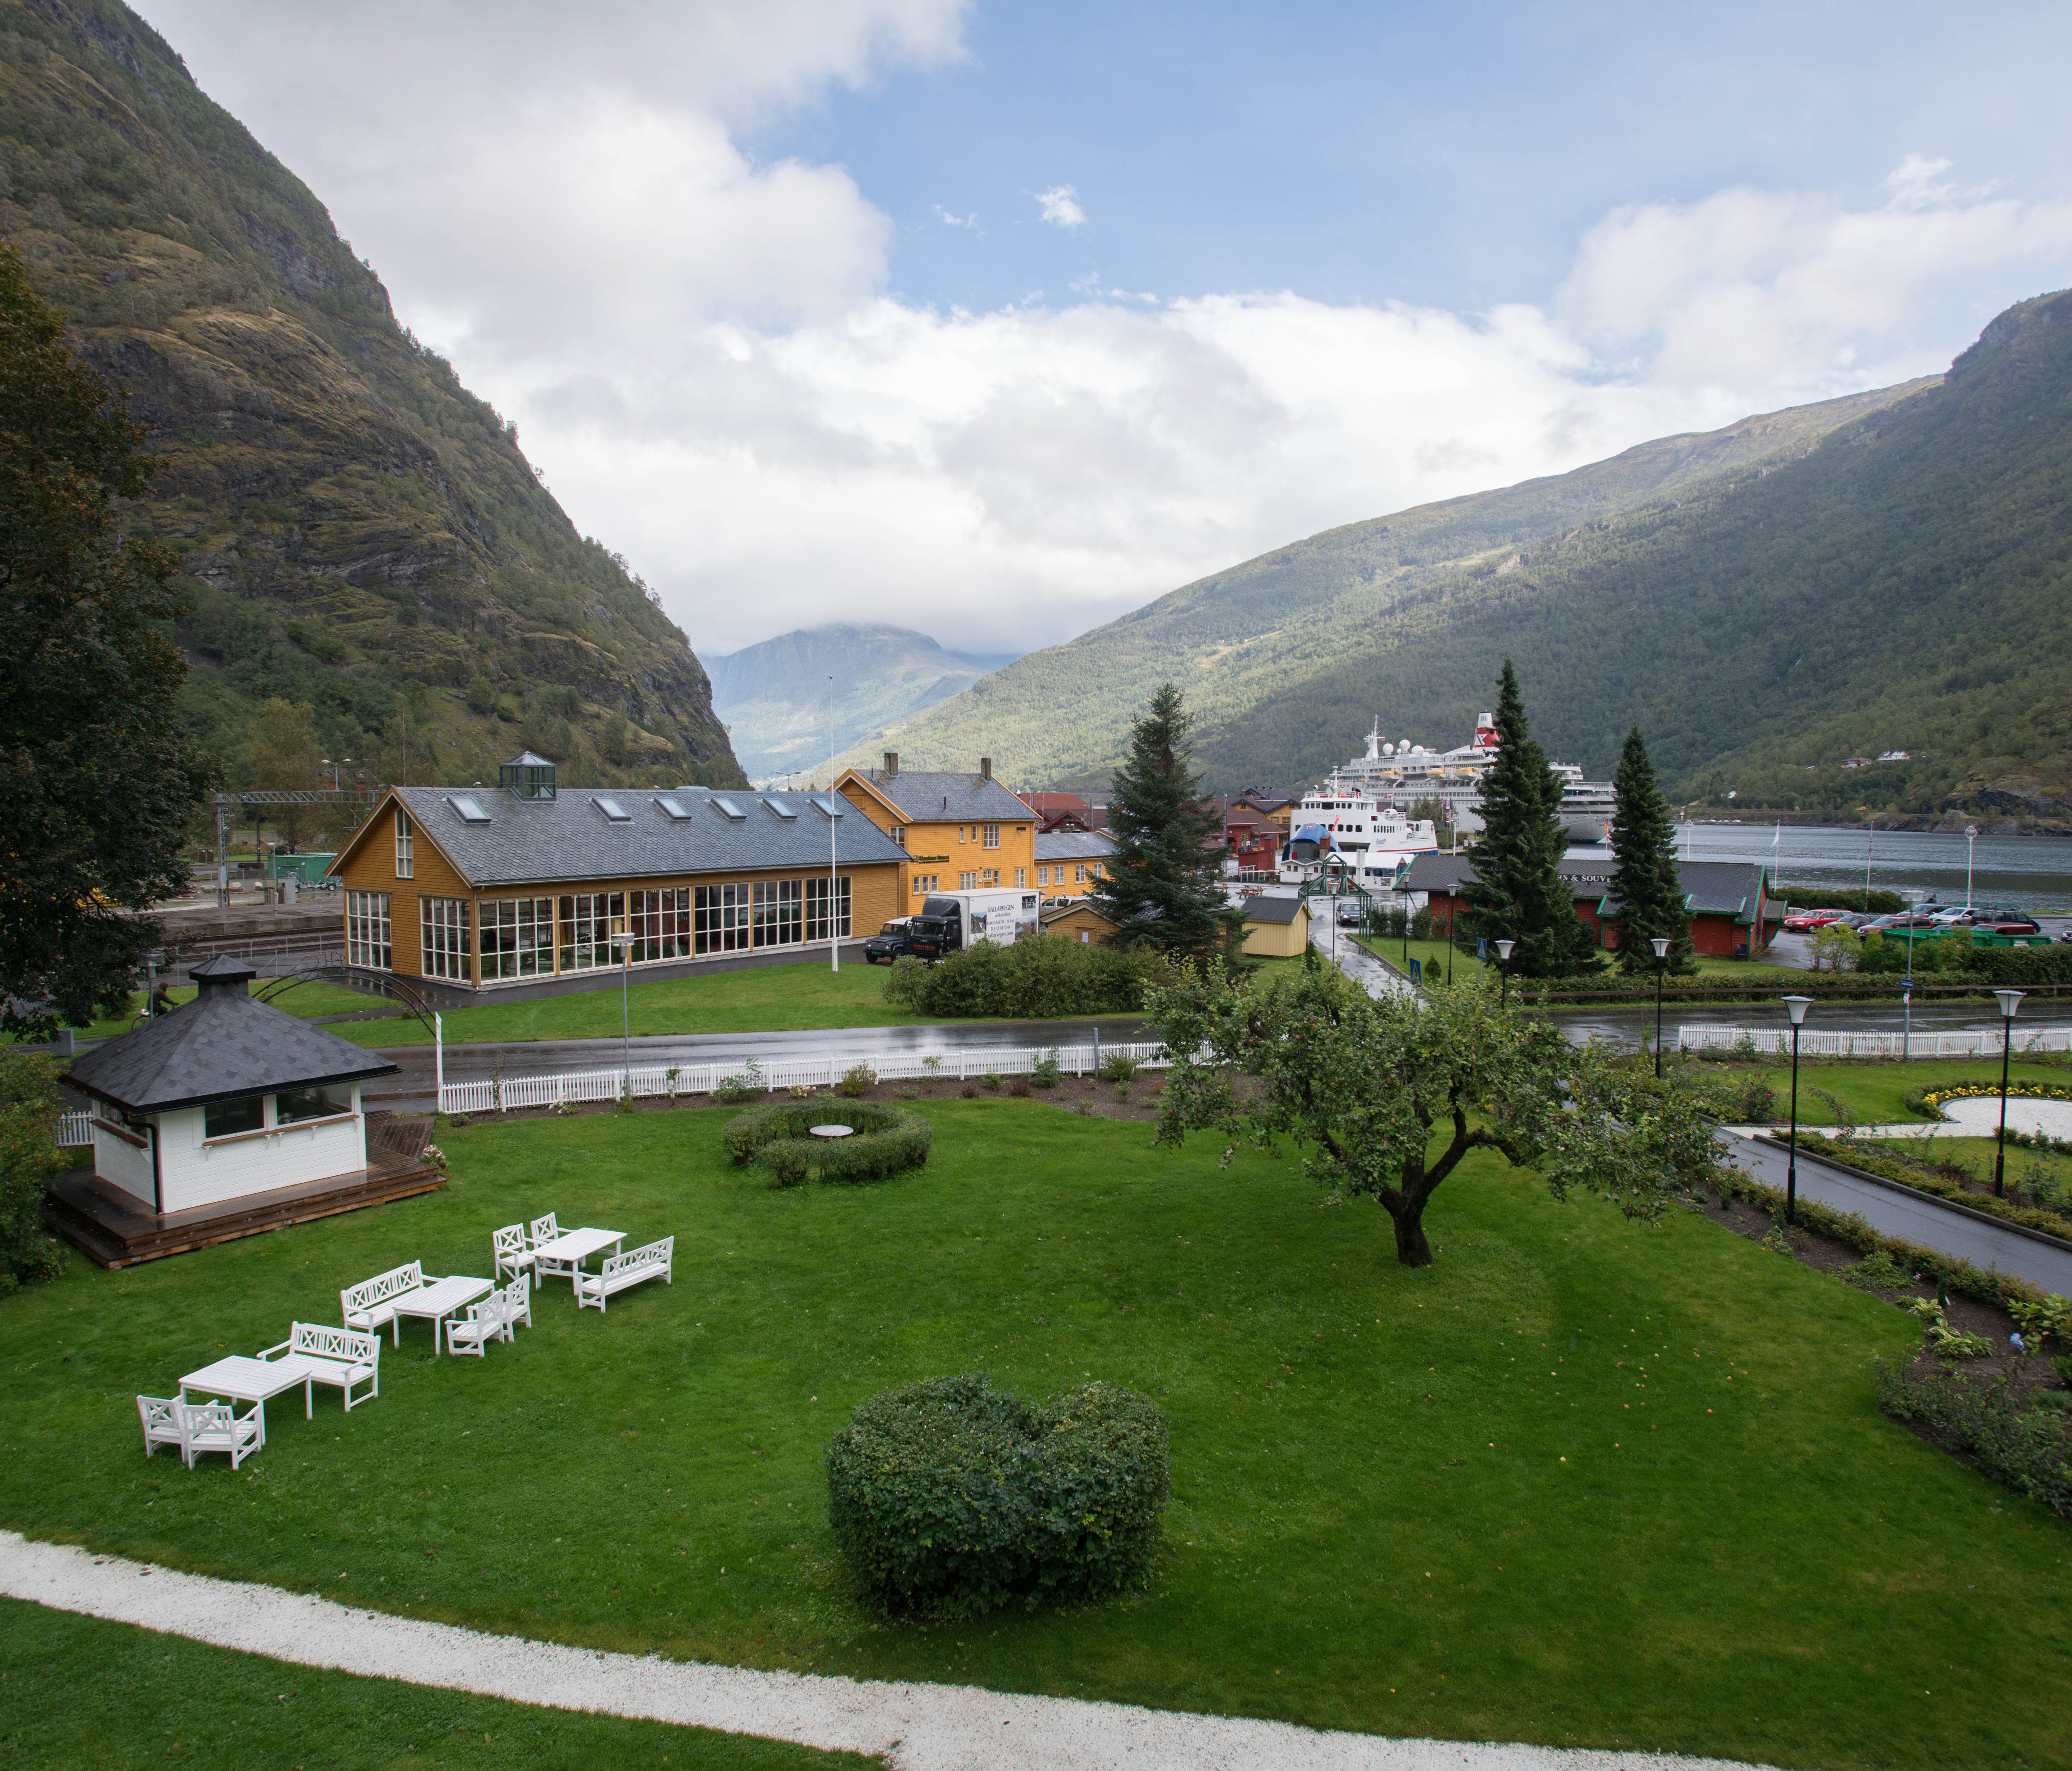 Fretheim Hotel, Norway: Many tourists who come to the tiny village of Flam stay for a short while after arriving on the Flam Railway (considered one of Europe's most scenic rides) and before their departure on a fjord cruise. Luckily, the Fretheim Ho